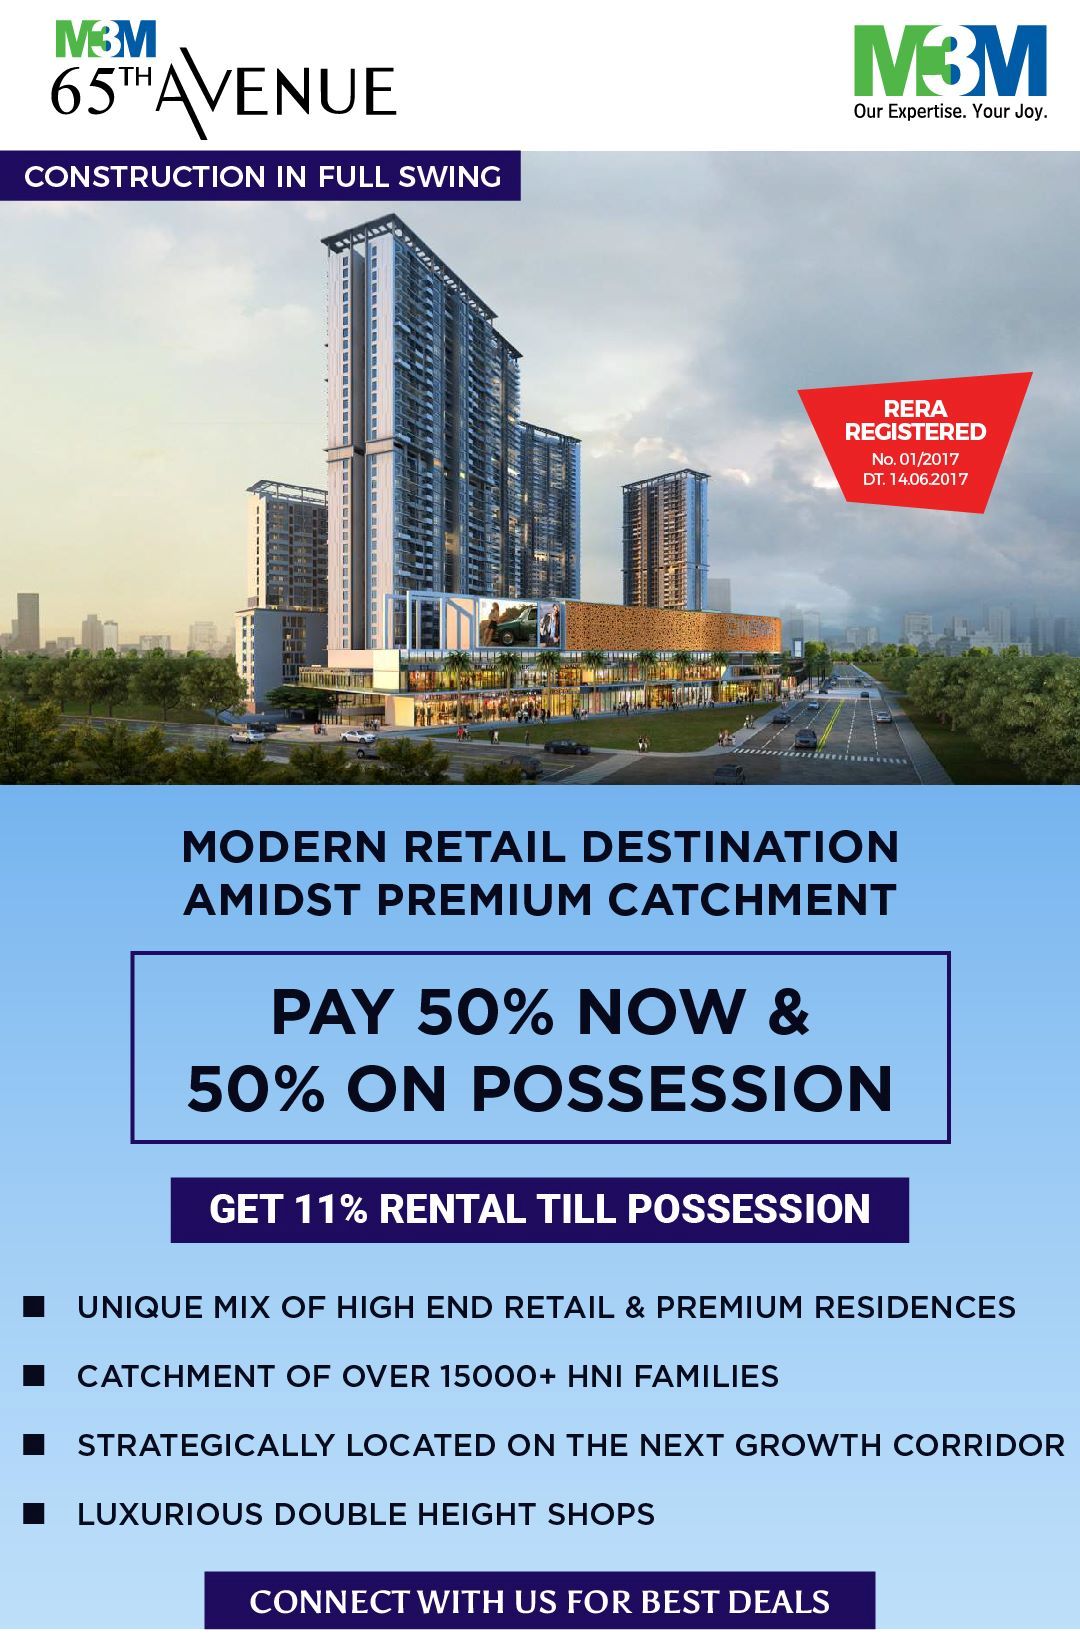 Pay 50% now & 50% on possession at M3M 65th Avenue in Gurgaon